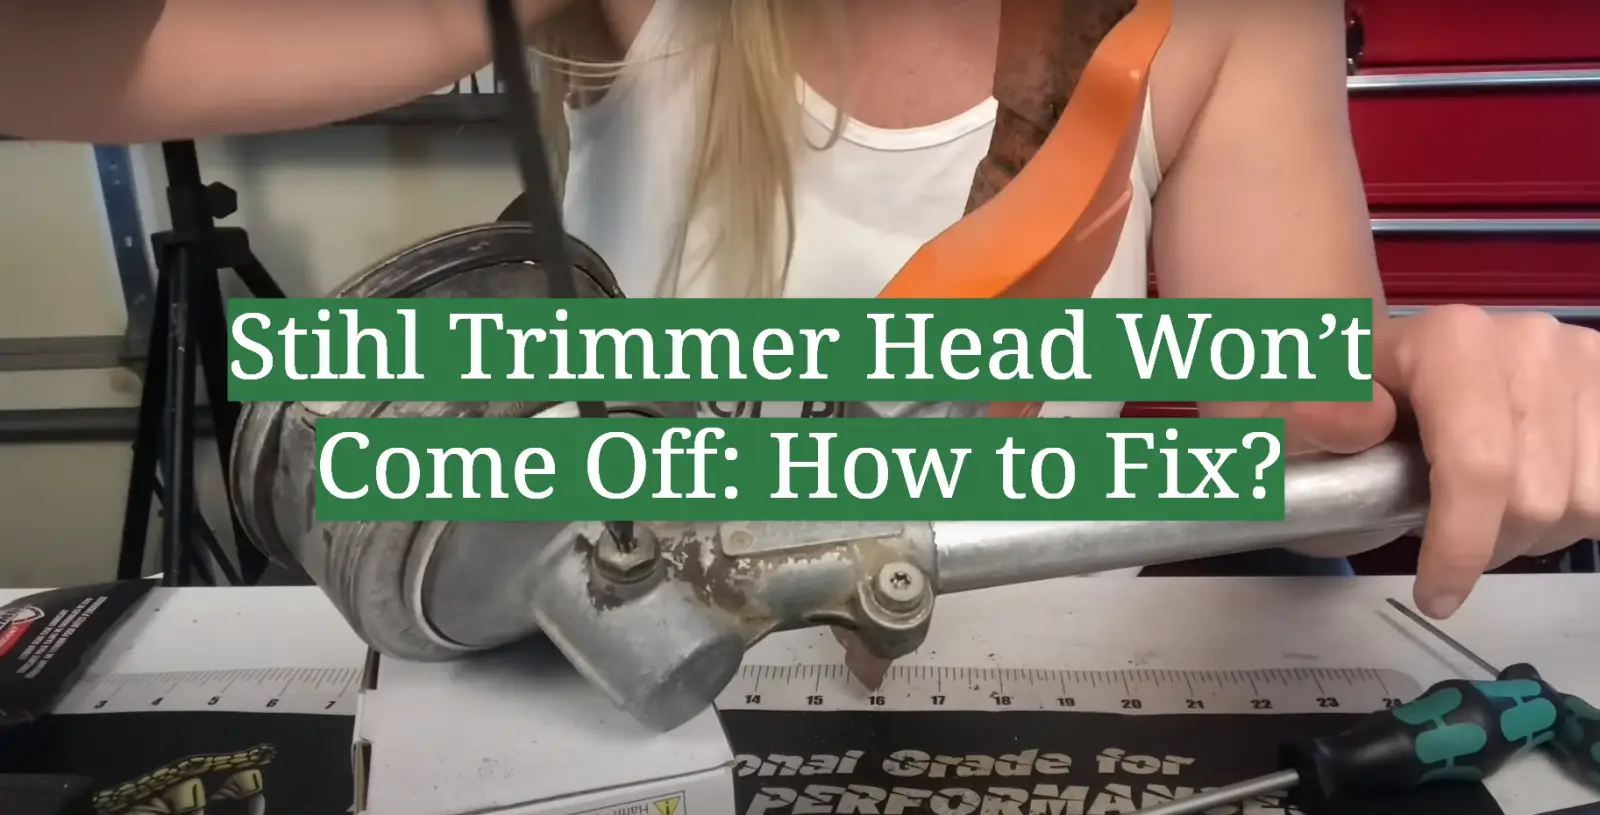 Stihl Trimmer Head Won’t Come Off: How to Fix?